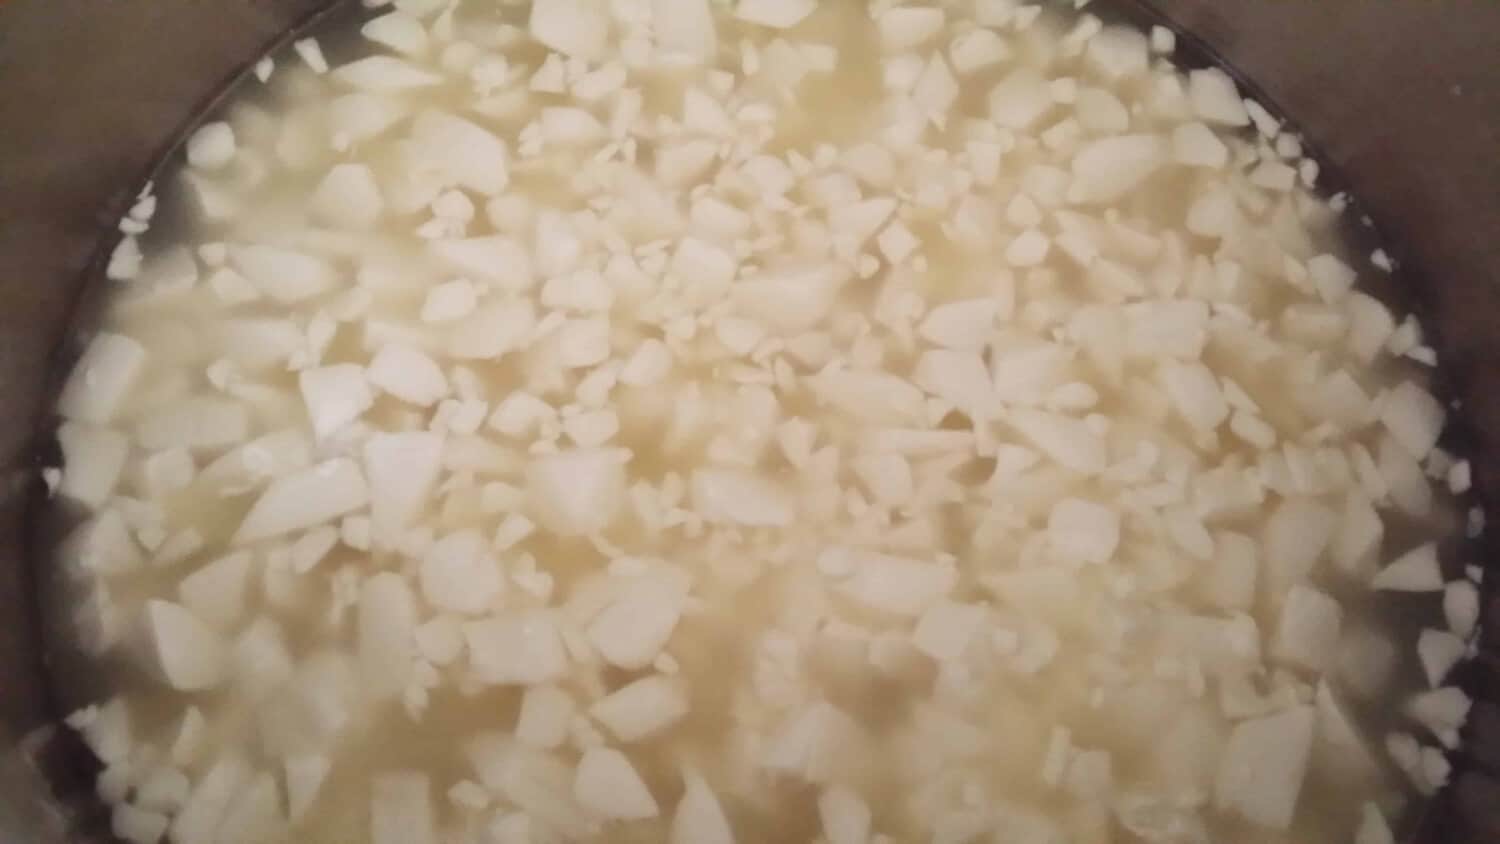 Pepper Jack Cheese curds floating in whey